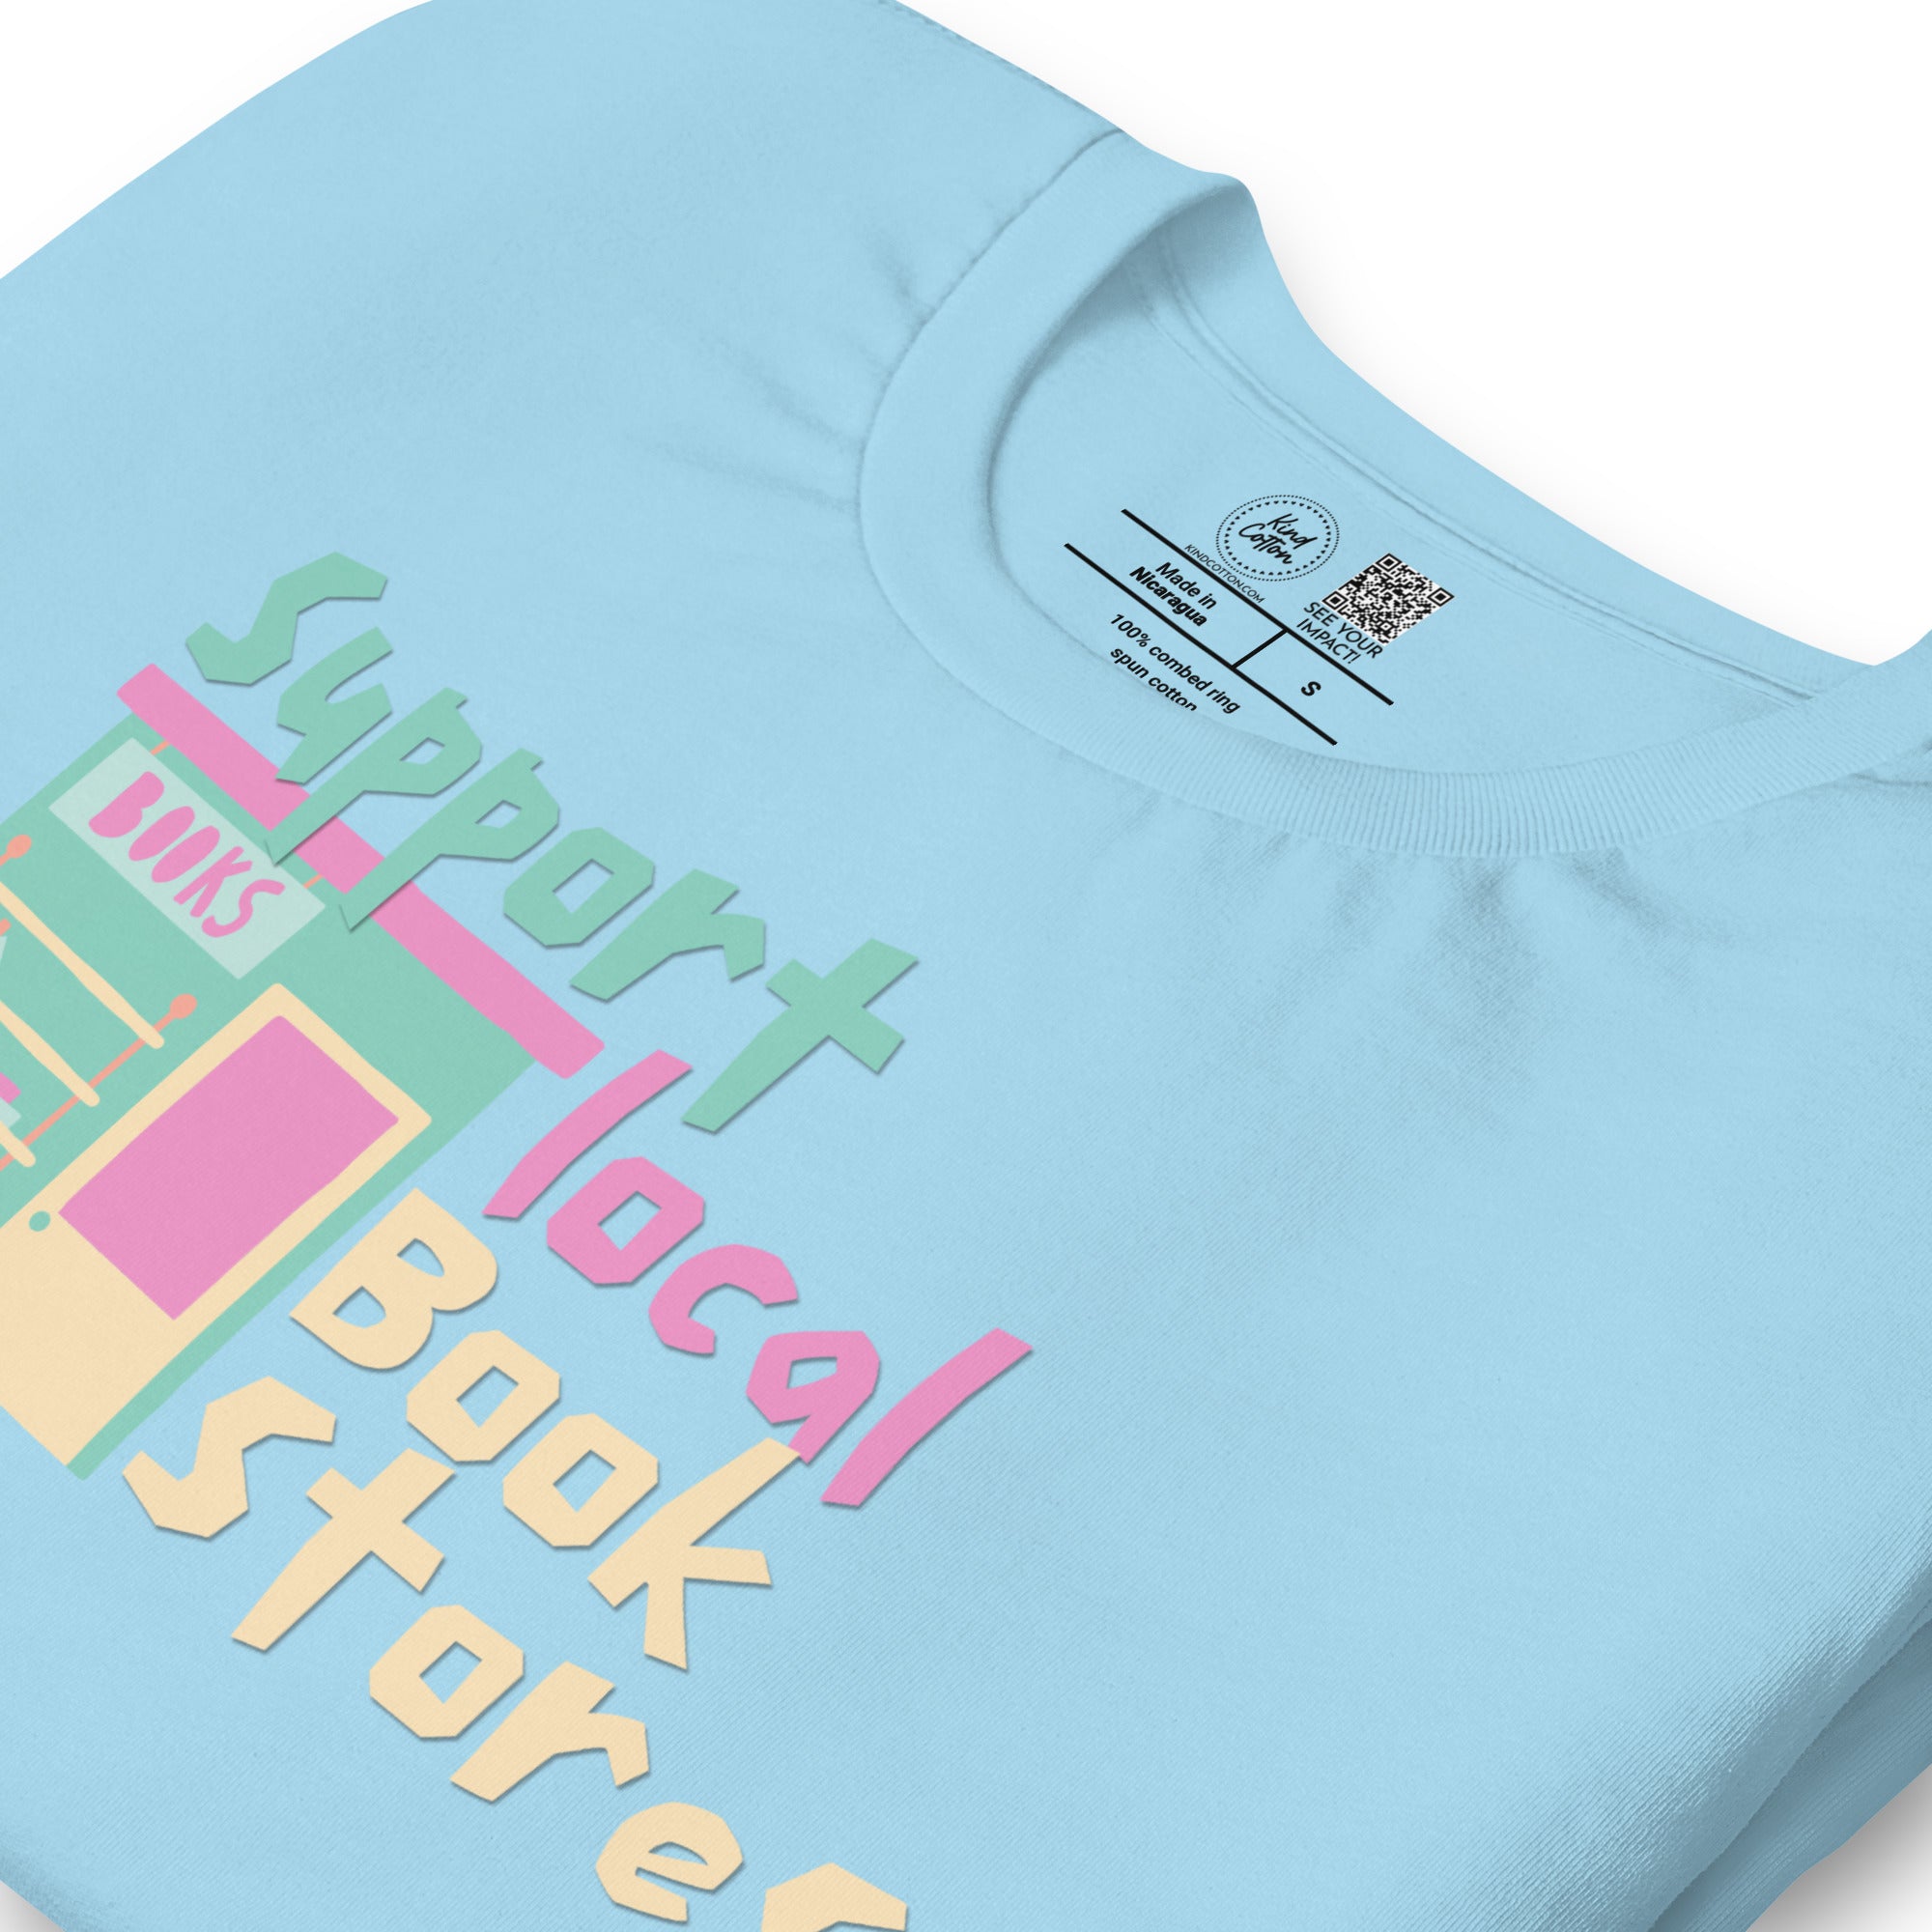 Support Local Bookstores Classic Tee